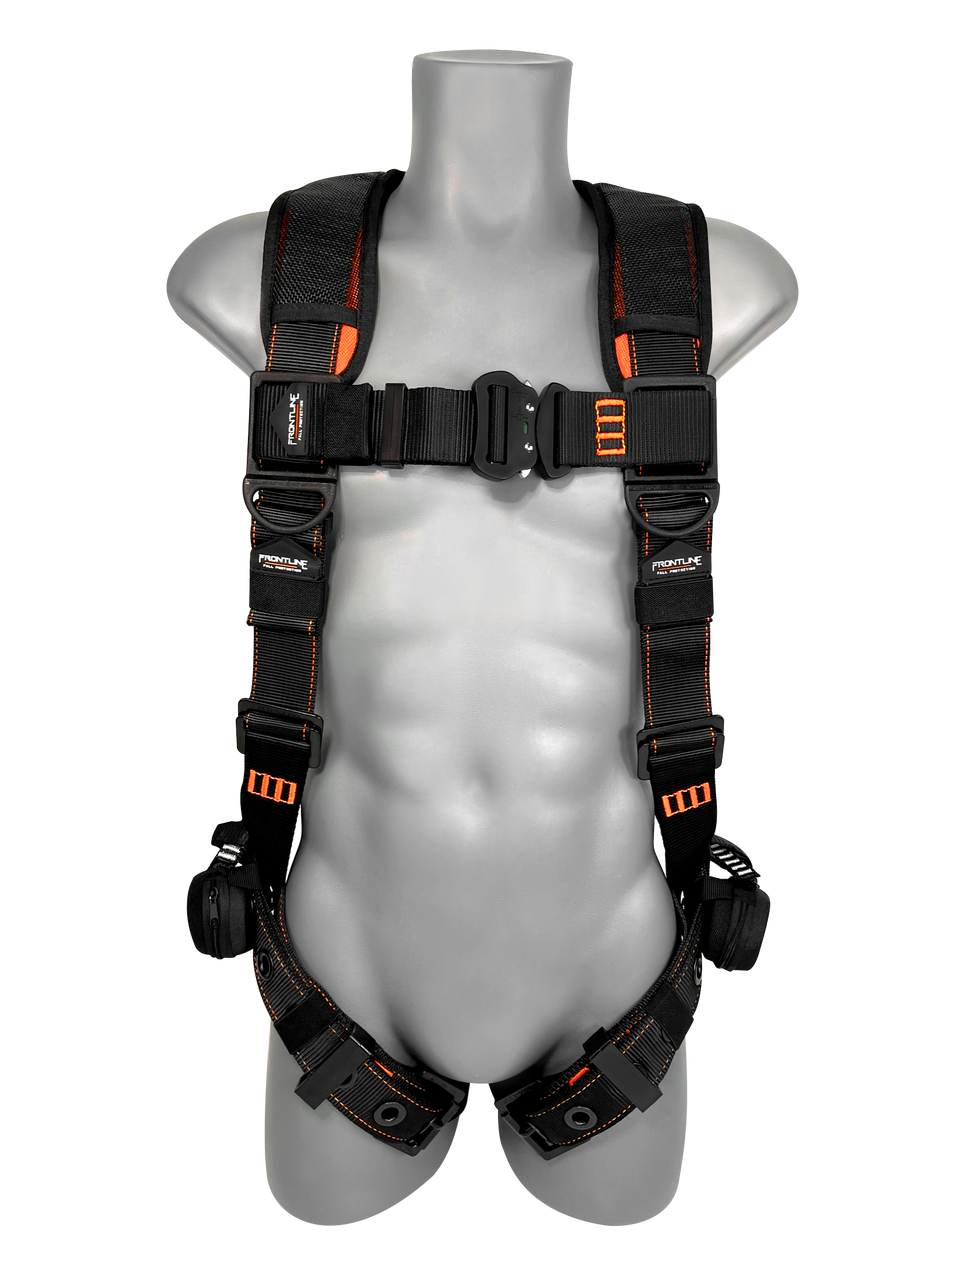 Frontline 110VTB Combat Lite Vest Style Harness with Aluminum Hardware and Suspension Trauma Straps